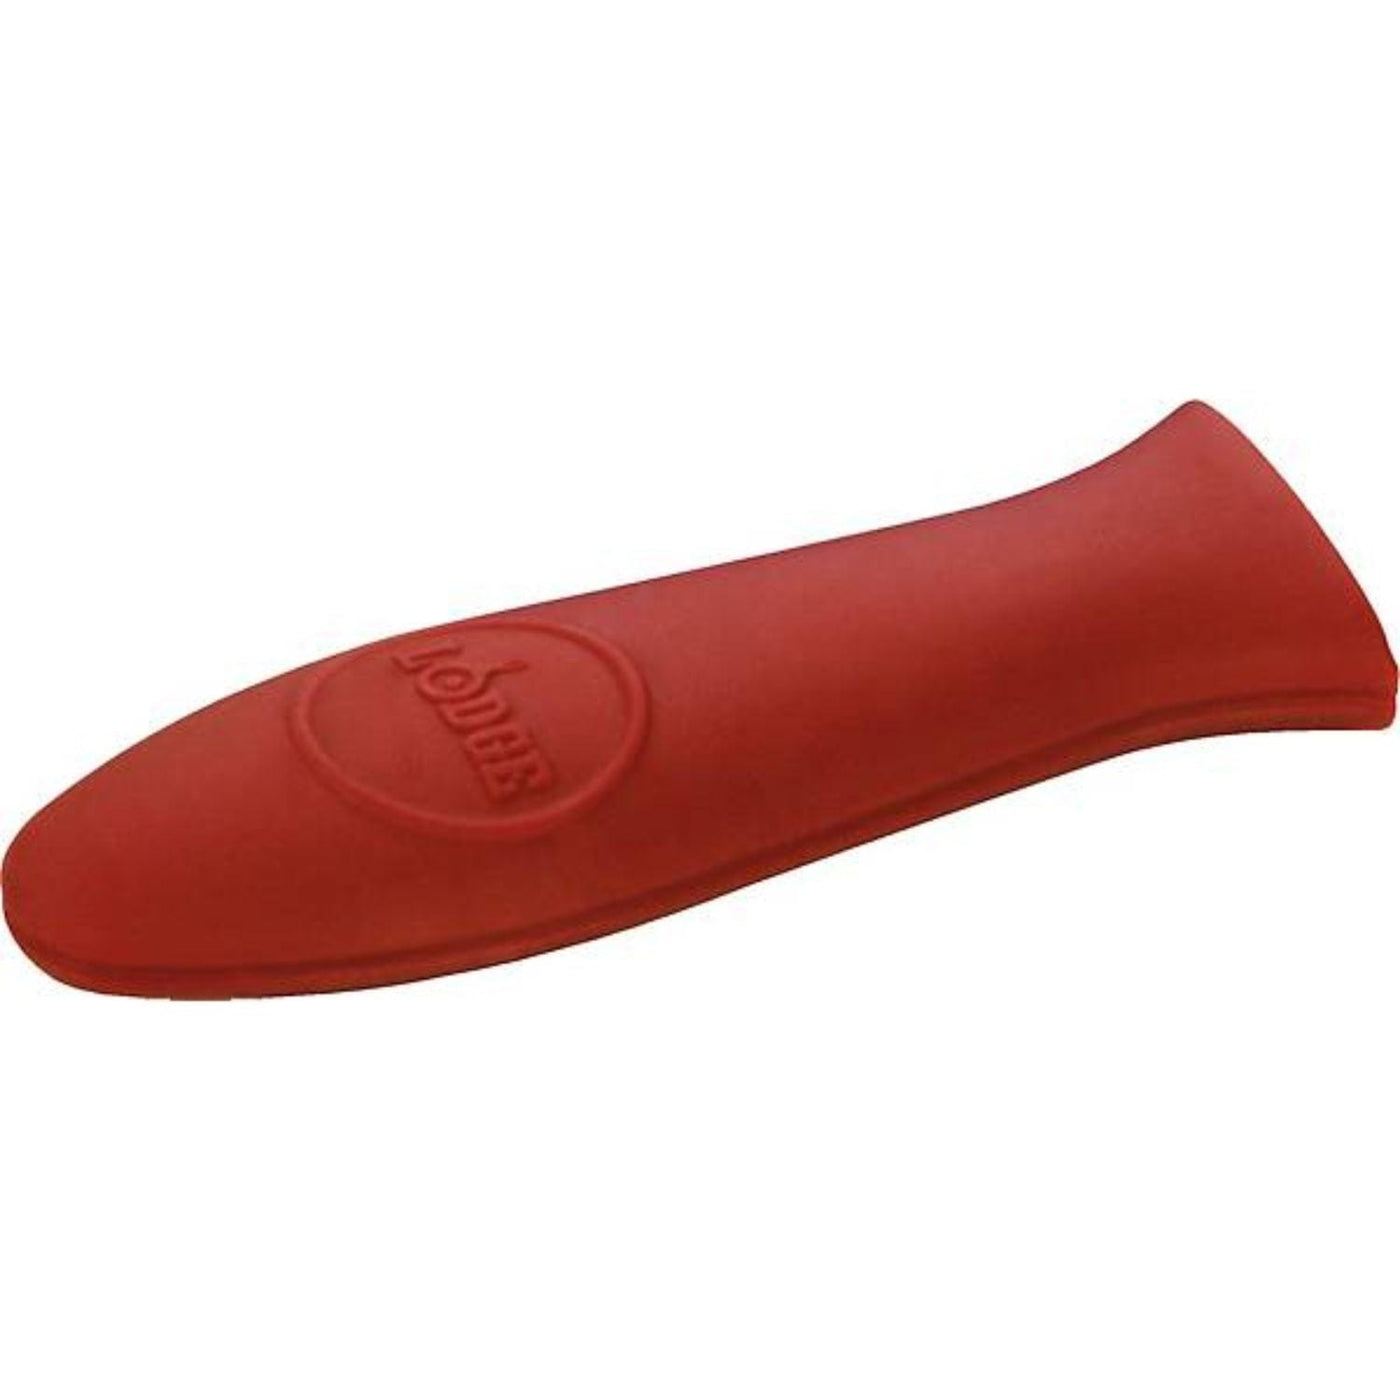 Lodge Cast Iron Lodge ASHH41 Red Silicone Hot Handle Holder Camping And Outdoor